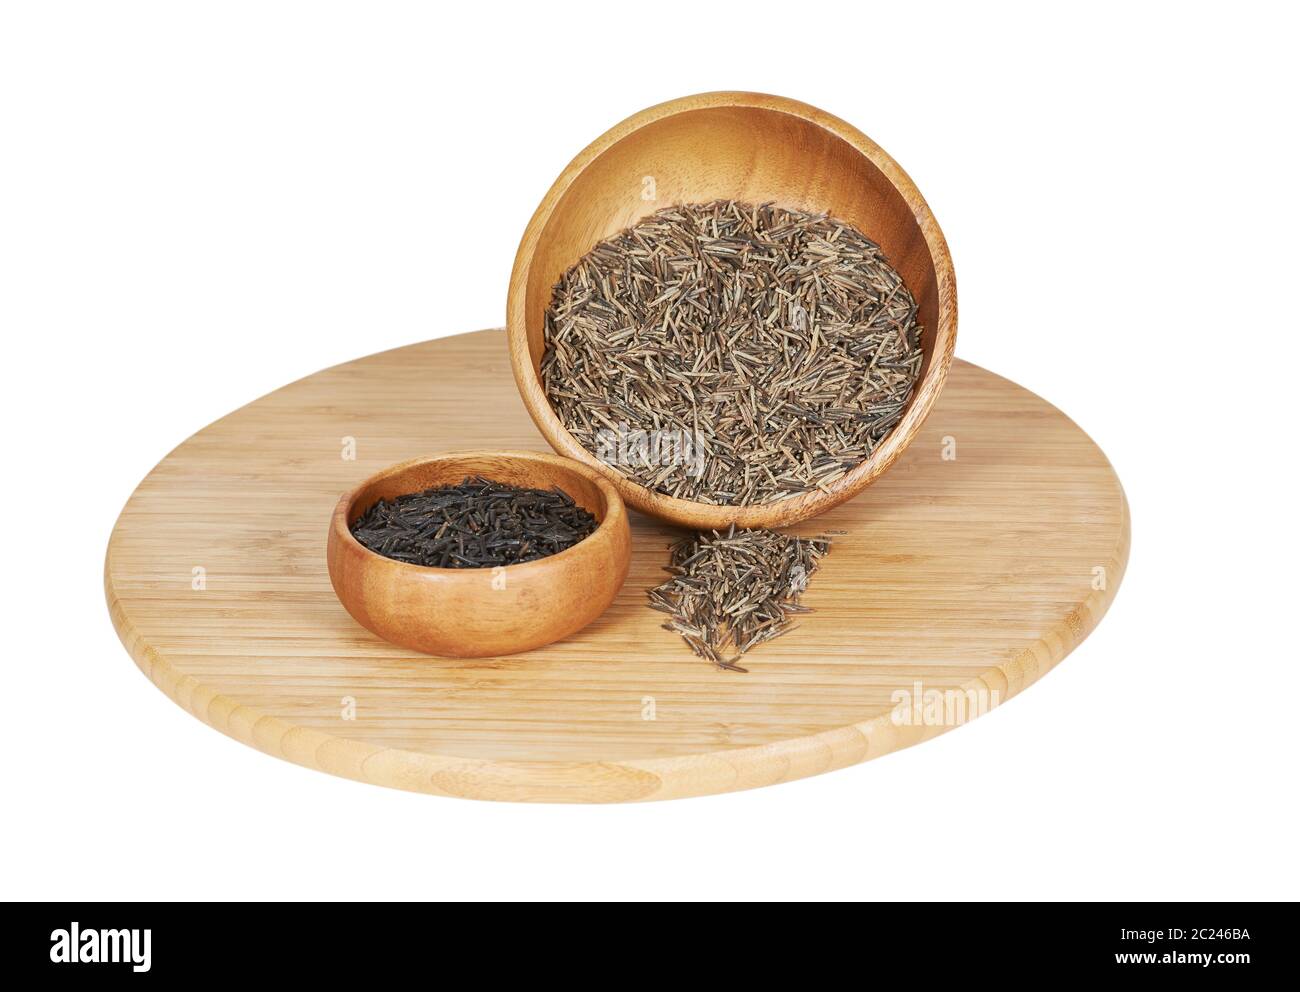 Wooden Bowls filled with two types of wild rice, the one on the left, dark one, is cultivated wild rice, the one of the right is wild grown and hand p Stock Photo